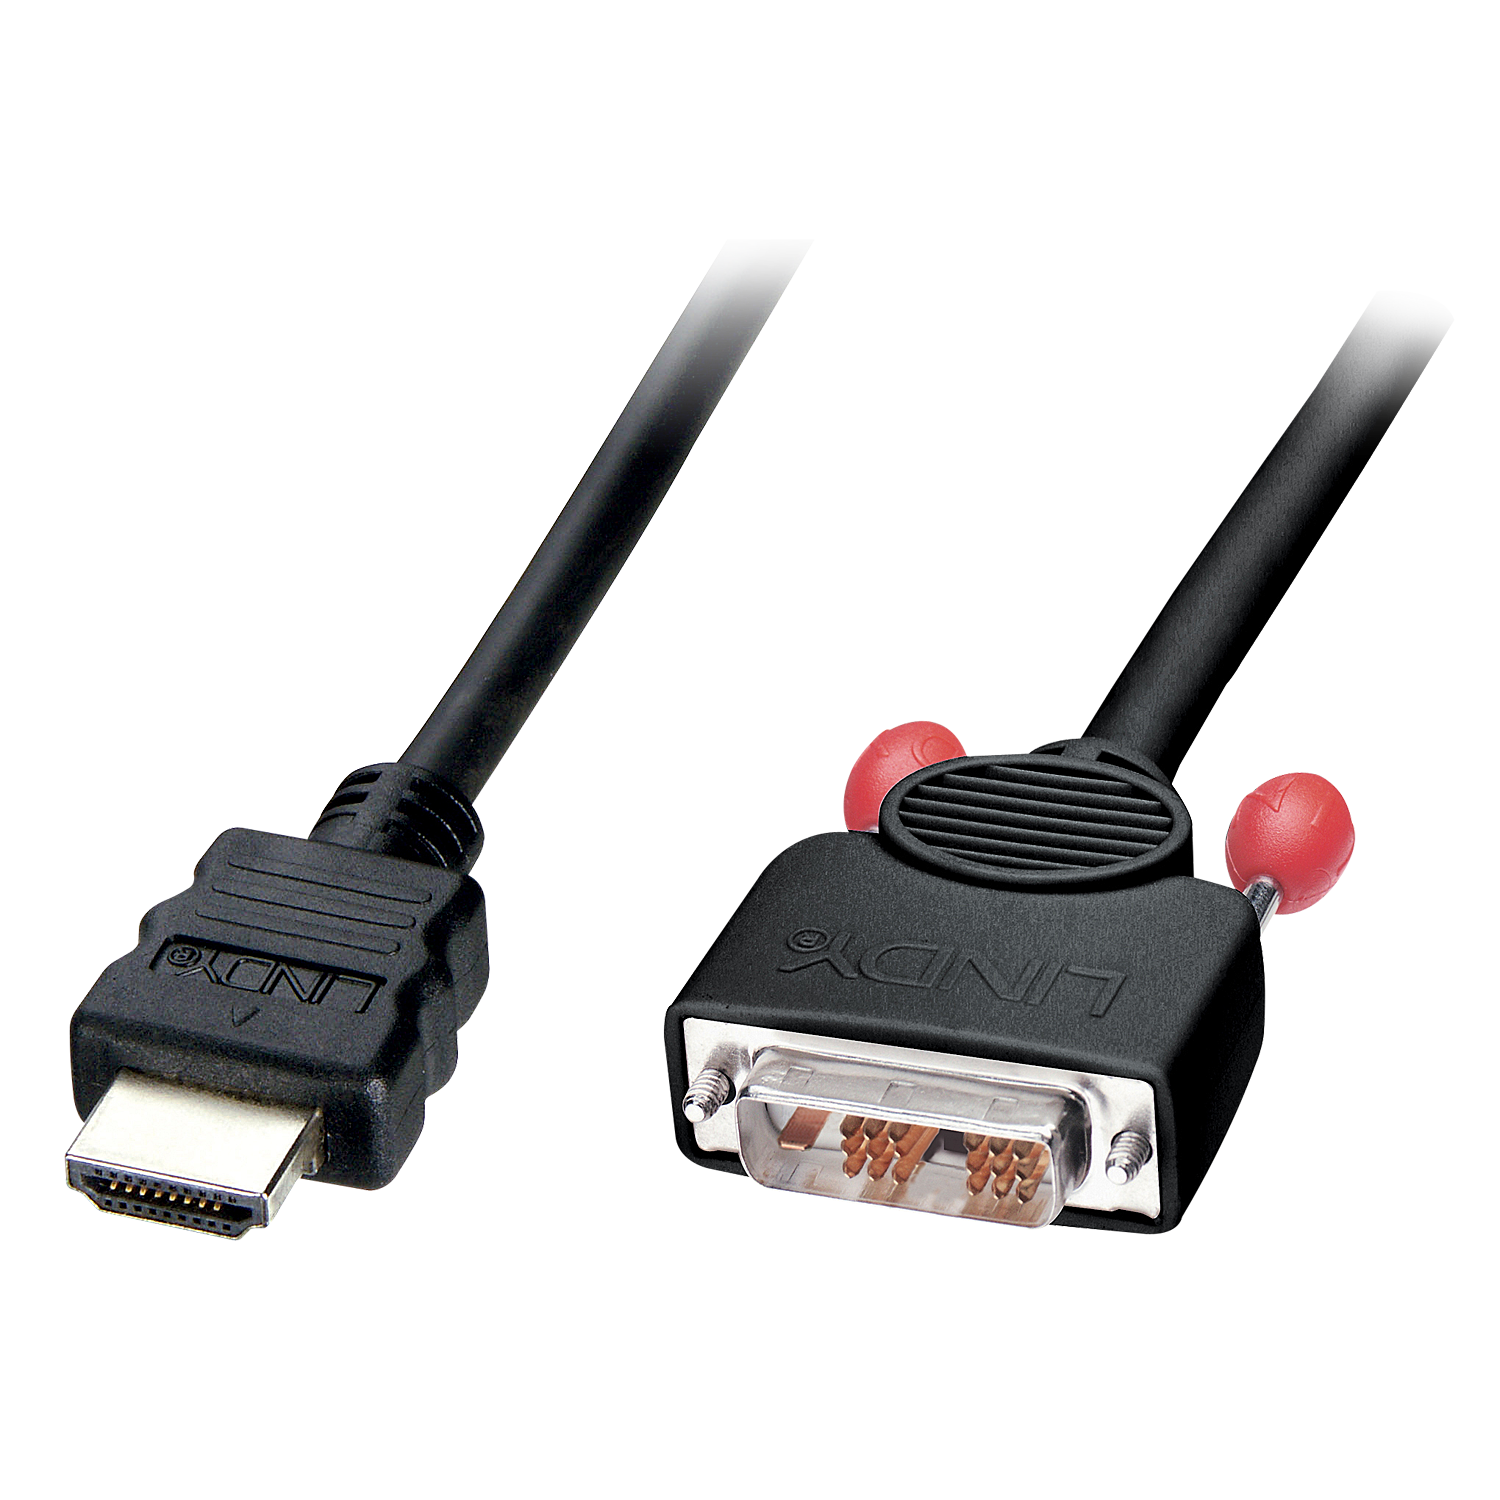 0.5m HDMI to DVI-D Cable, Black | $23 | The Connectivity Center